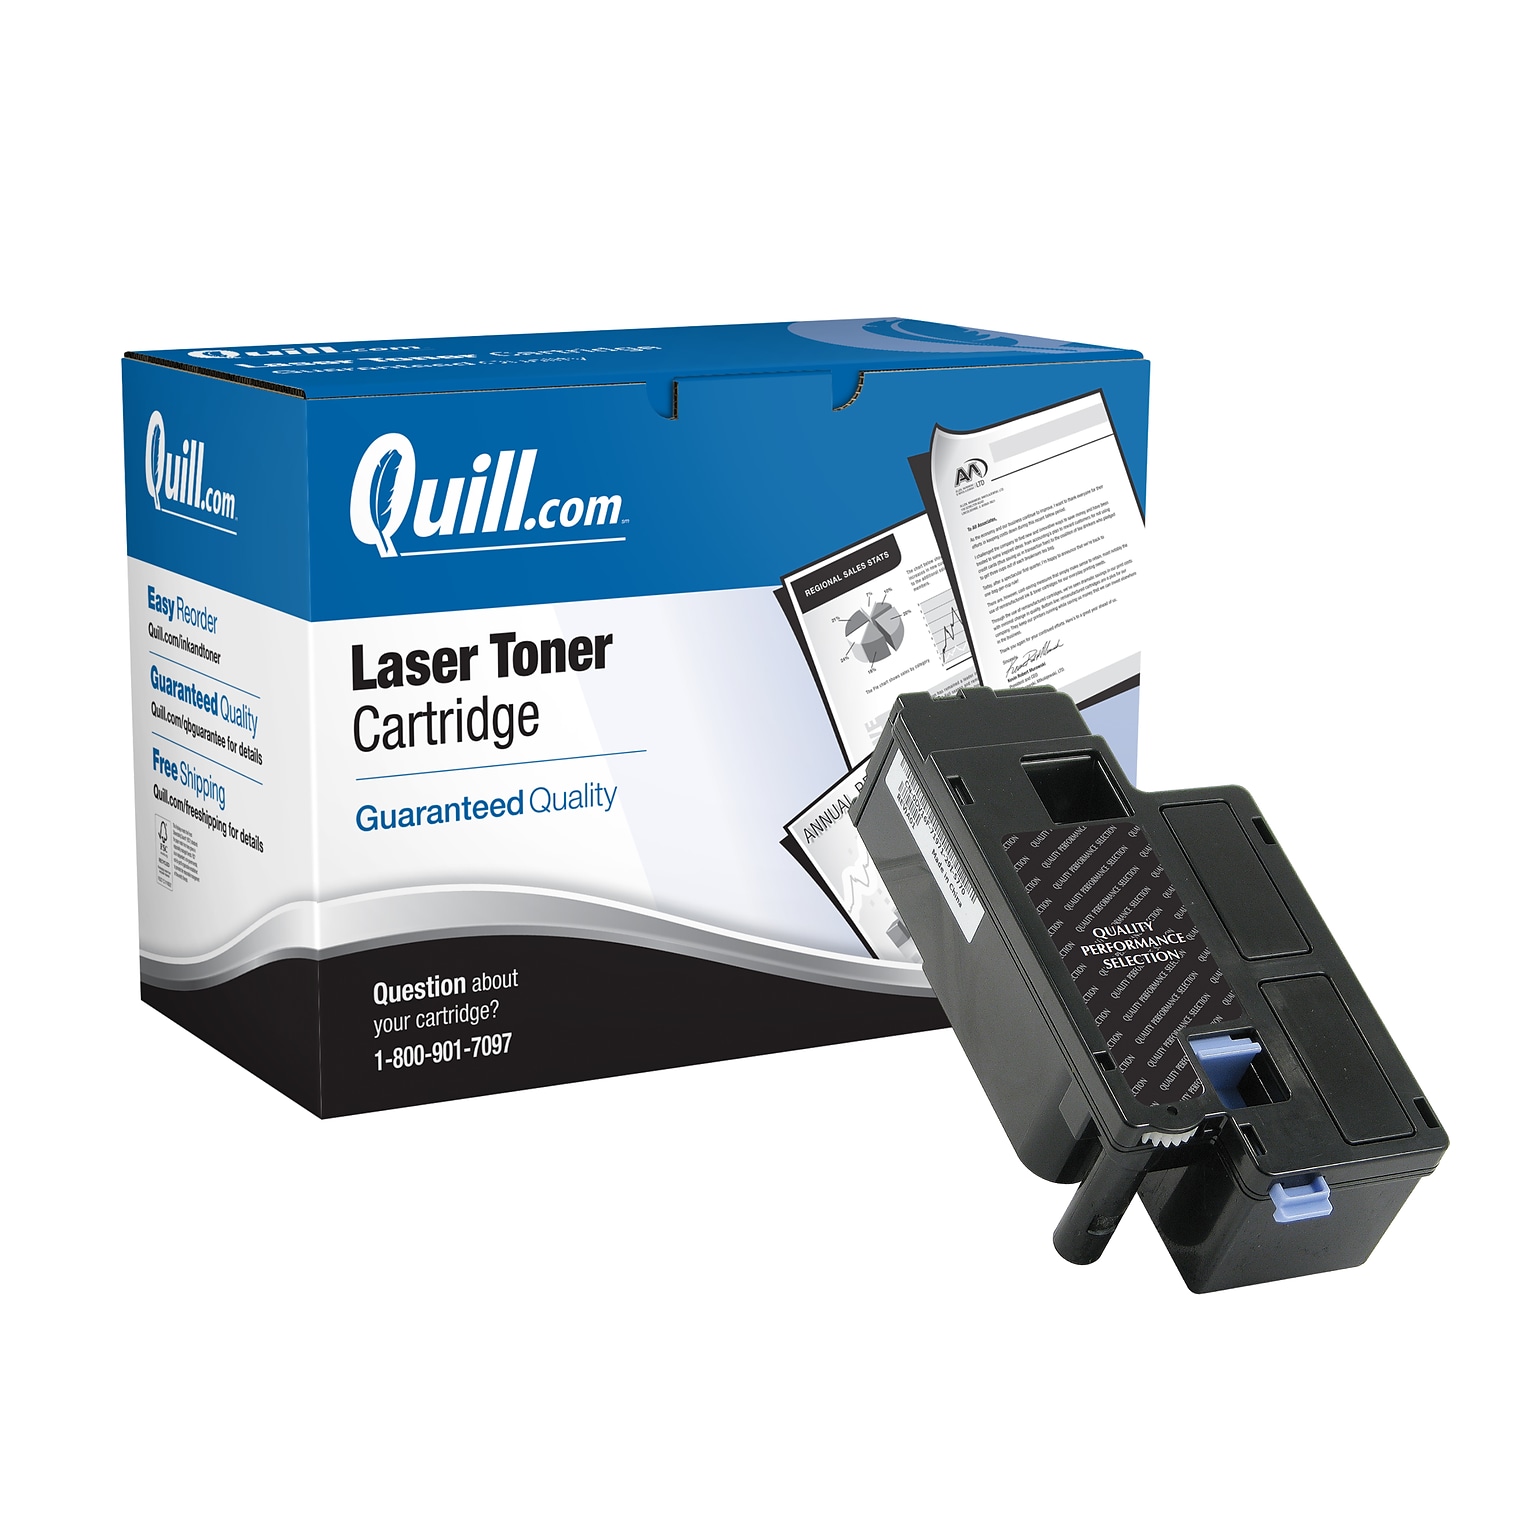 Quill Brand® Remanufactured Black Standard Yield Toner Cartridge Replacement for Xerox 6010/6015 (106R01630) (Lifetime Warranty)